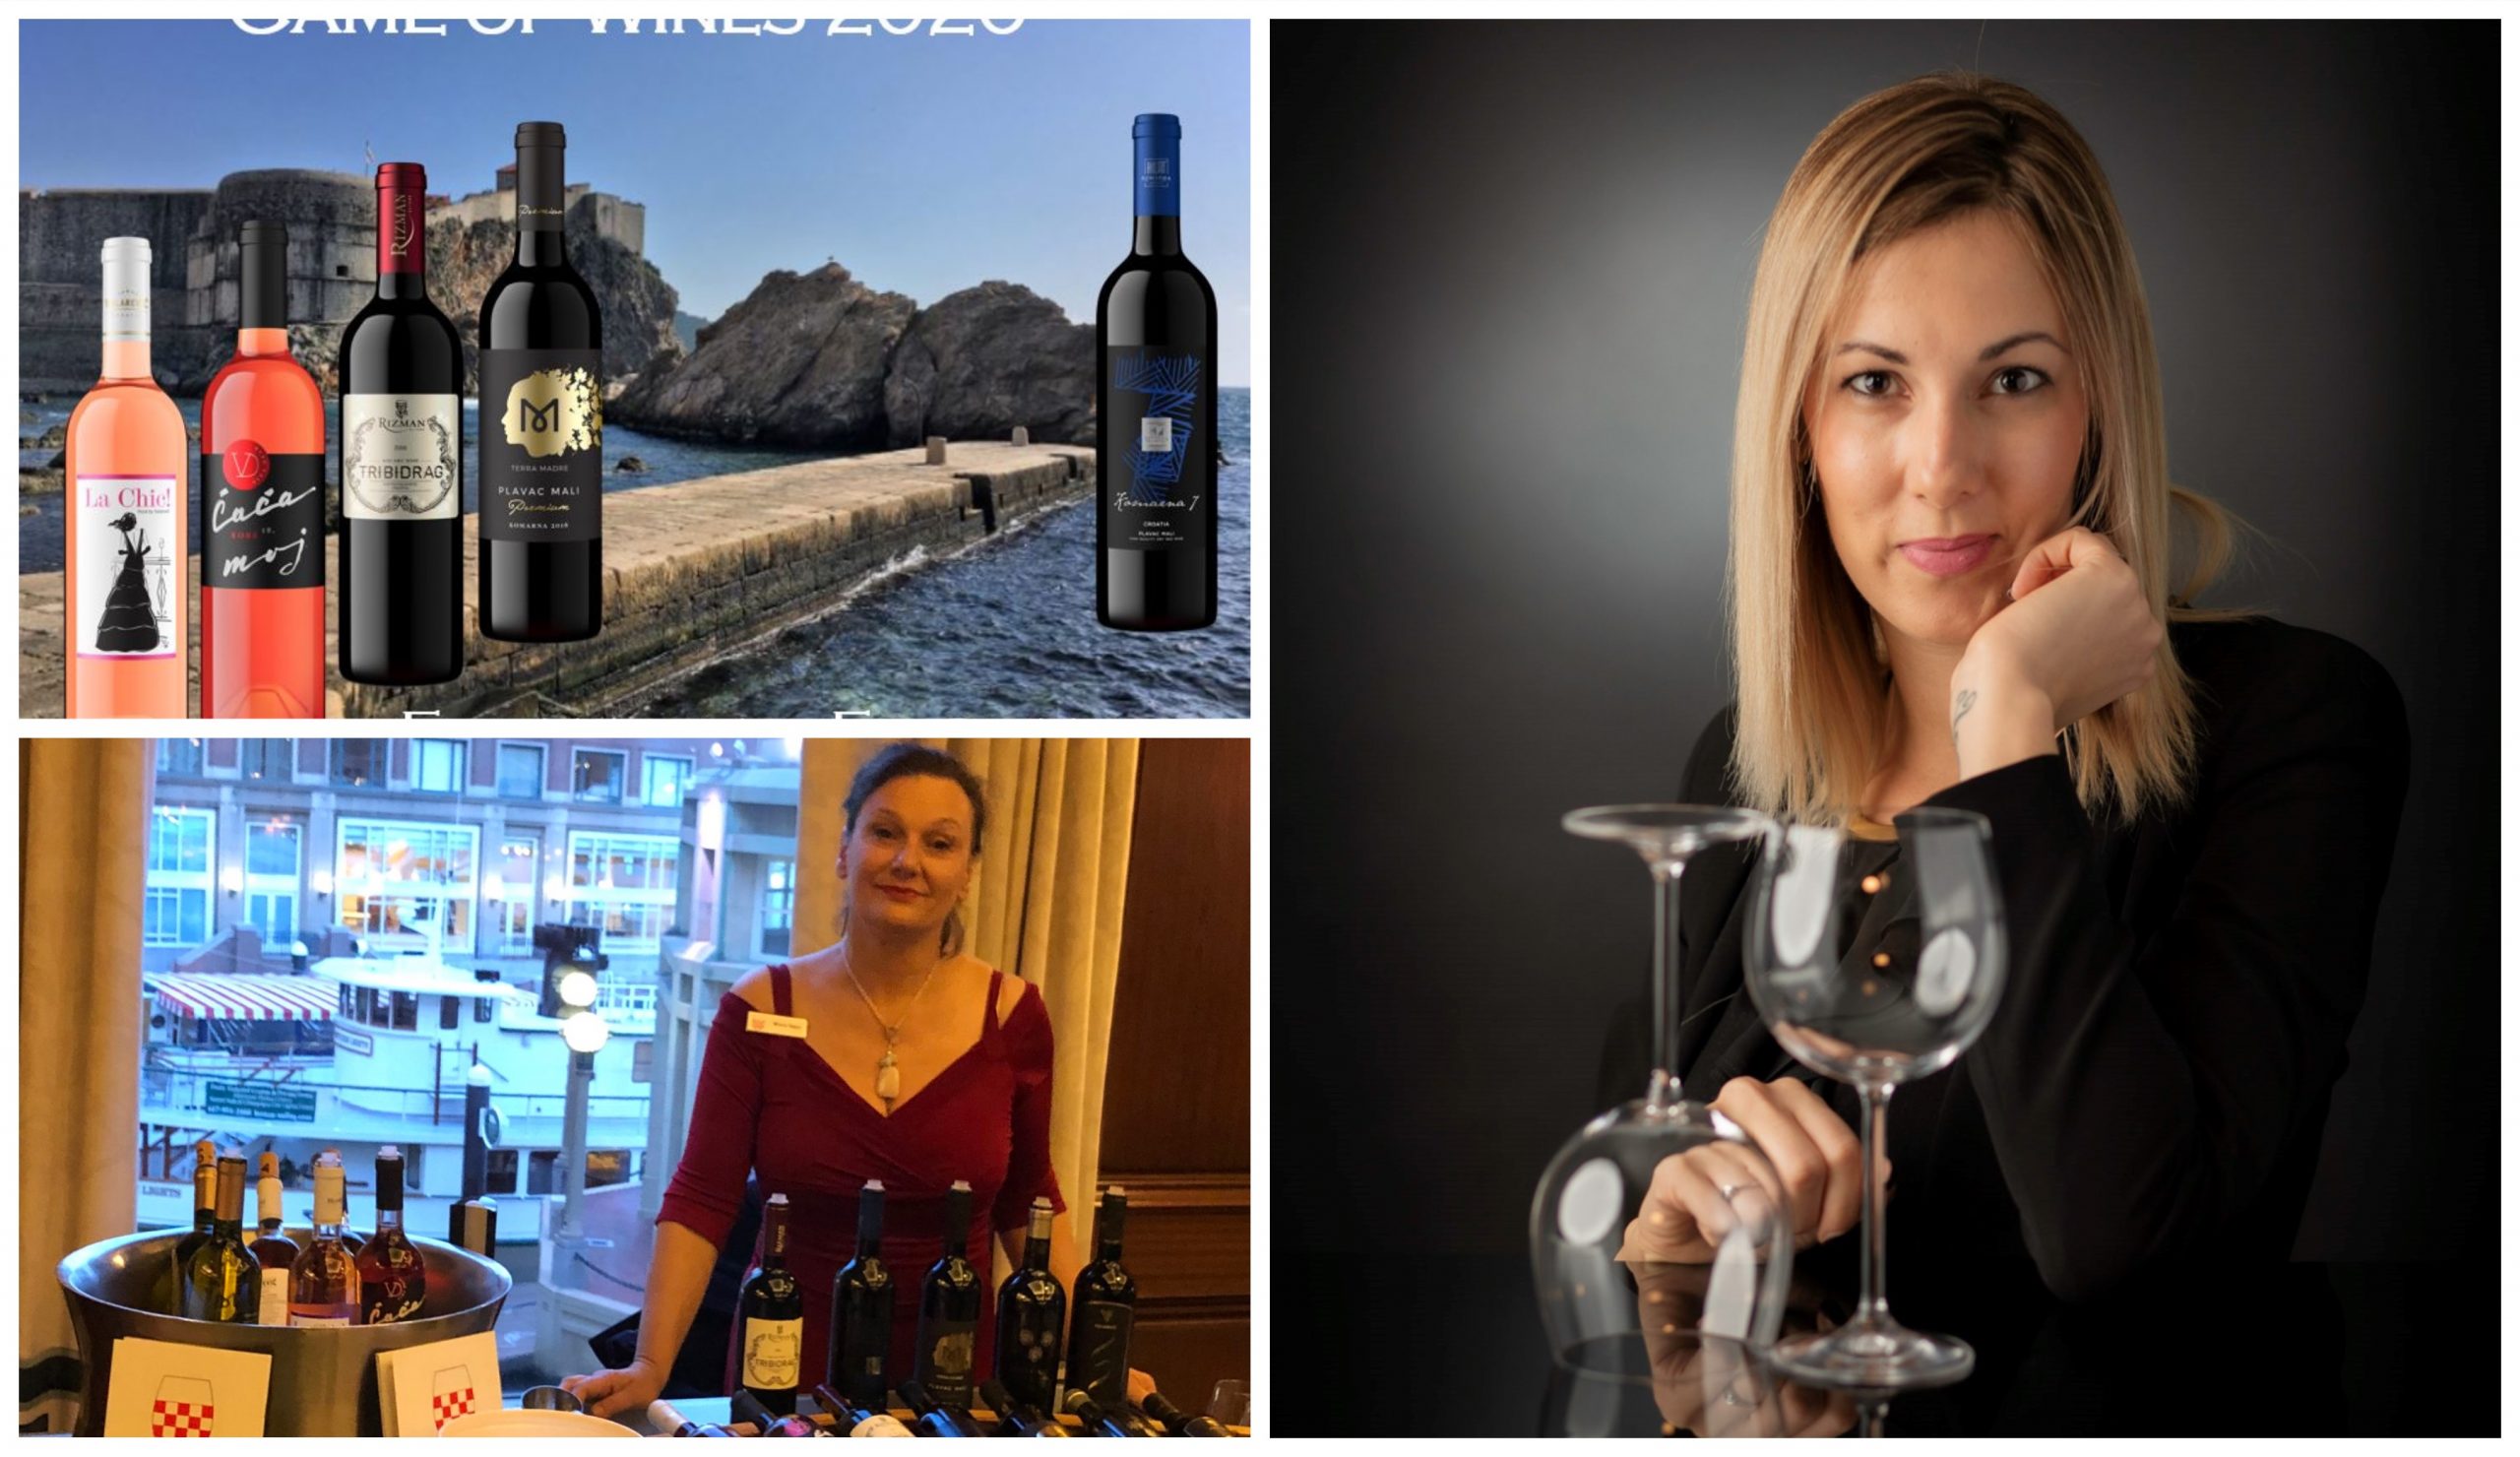 Croatian wines: “Game of Wines 2020” collaboration announced